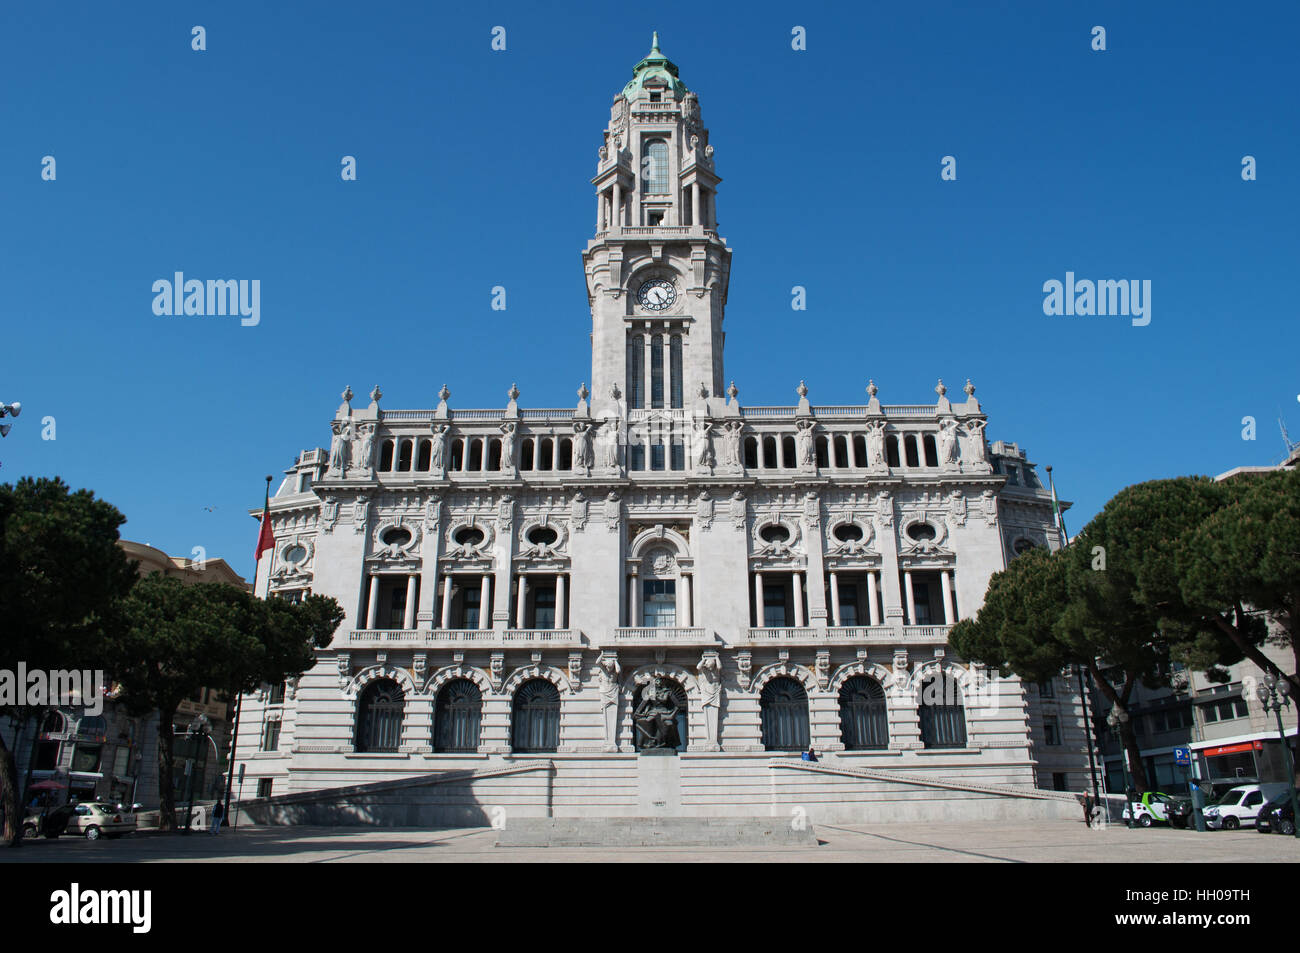 Portugal: view of Porto City Hall, built at the beginning of the 20th century, one of the most famous monuments of the Old City Stock Photo